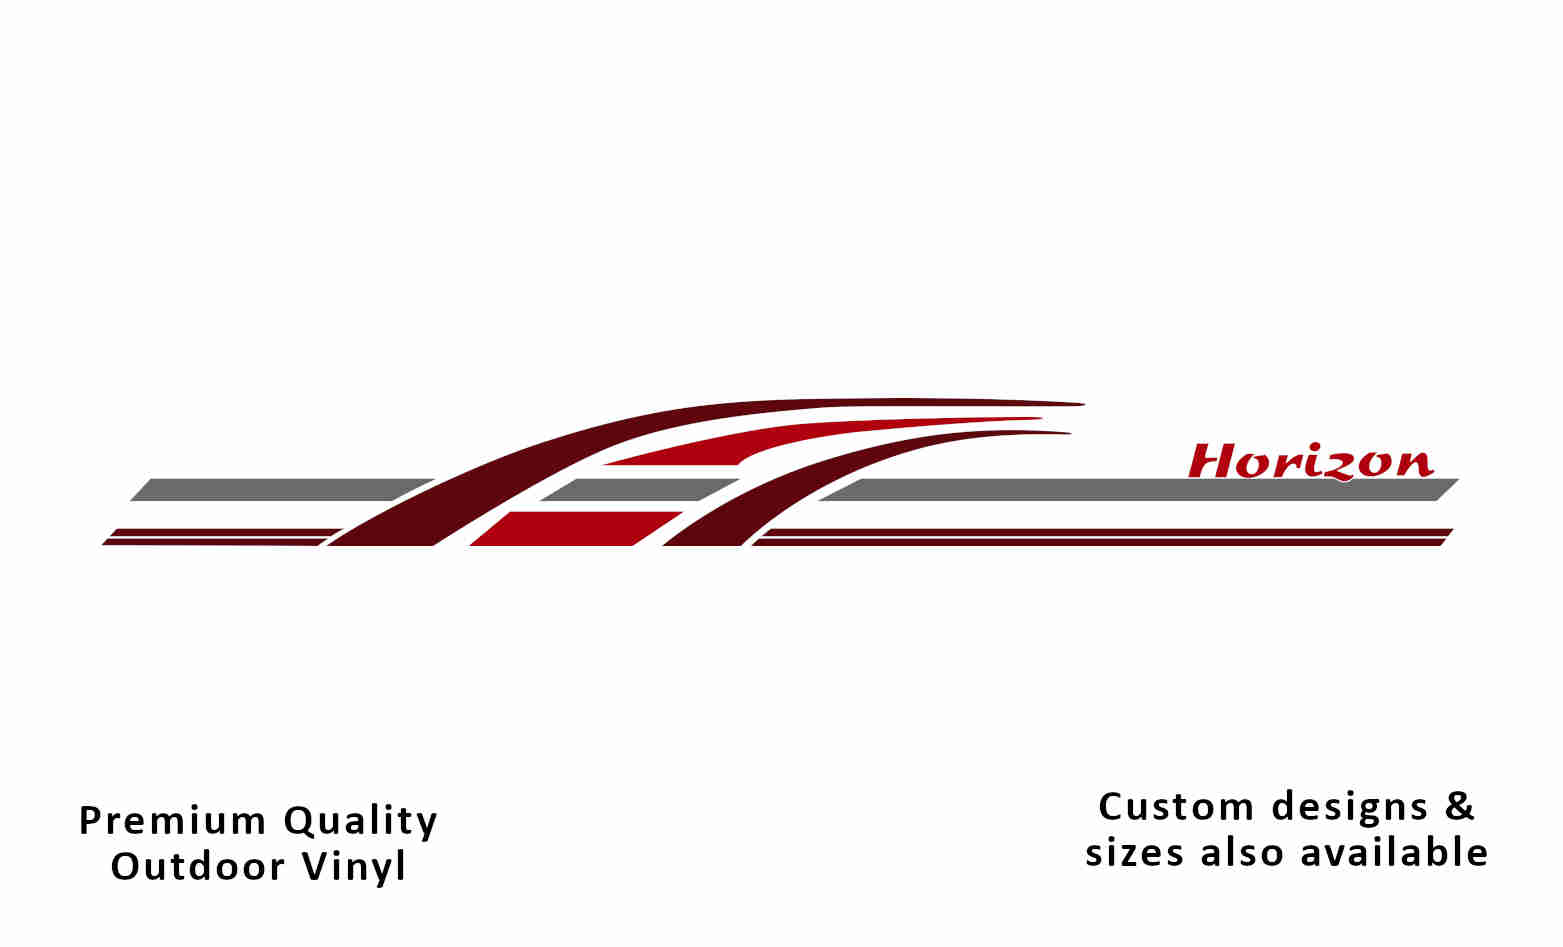 Millard horizon 2003-05 front caravan replacement decals and stickers in purple red, red and silver-grey.